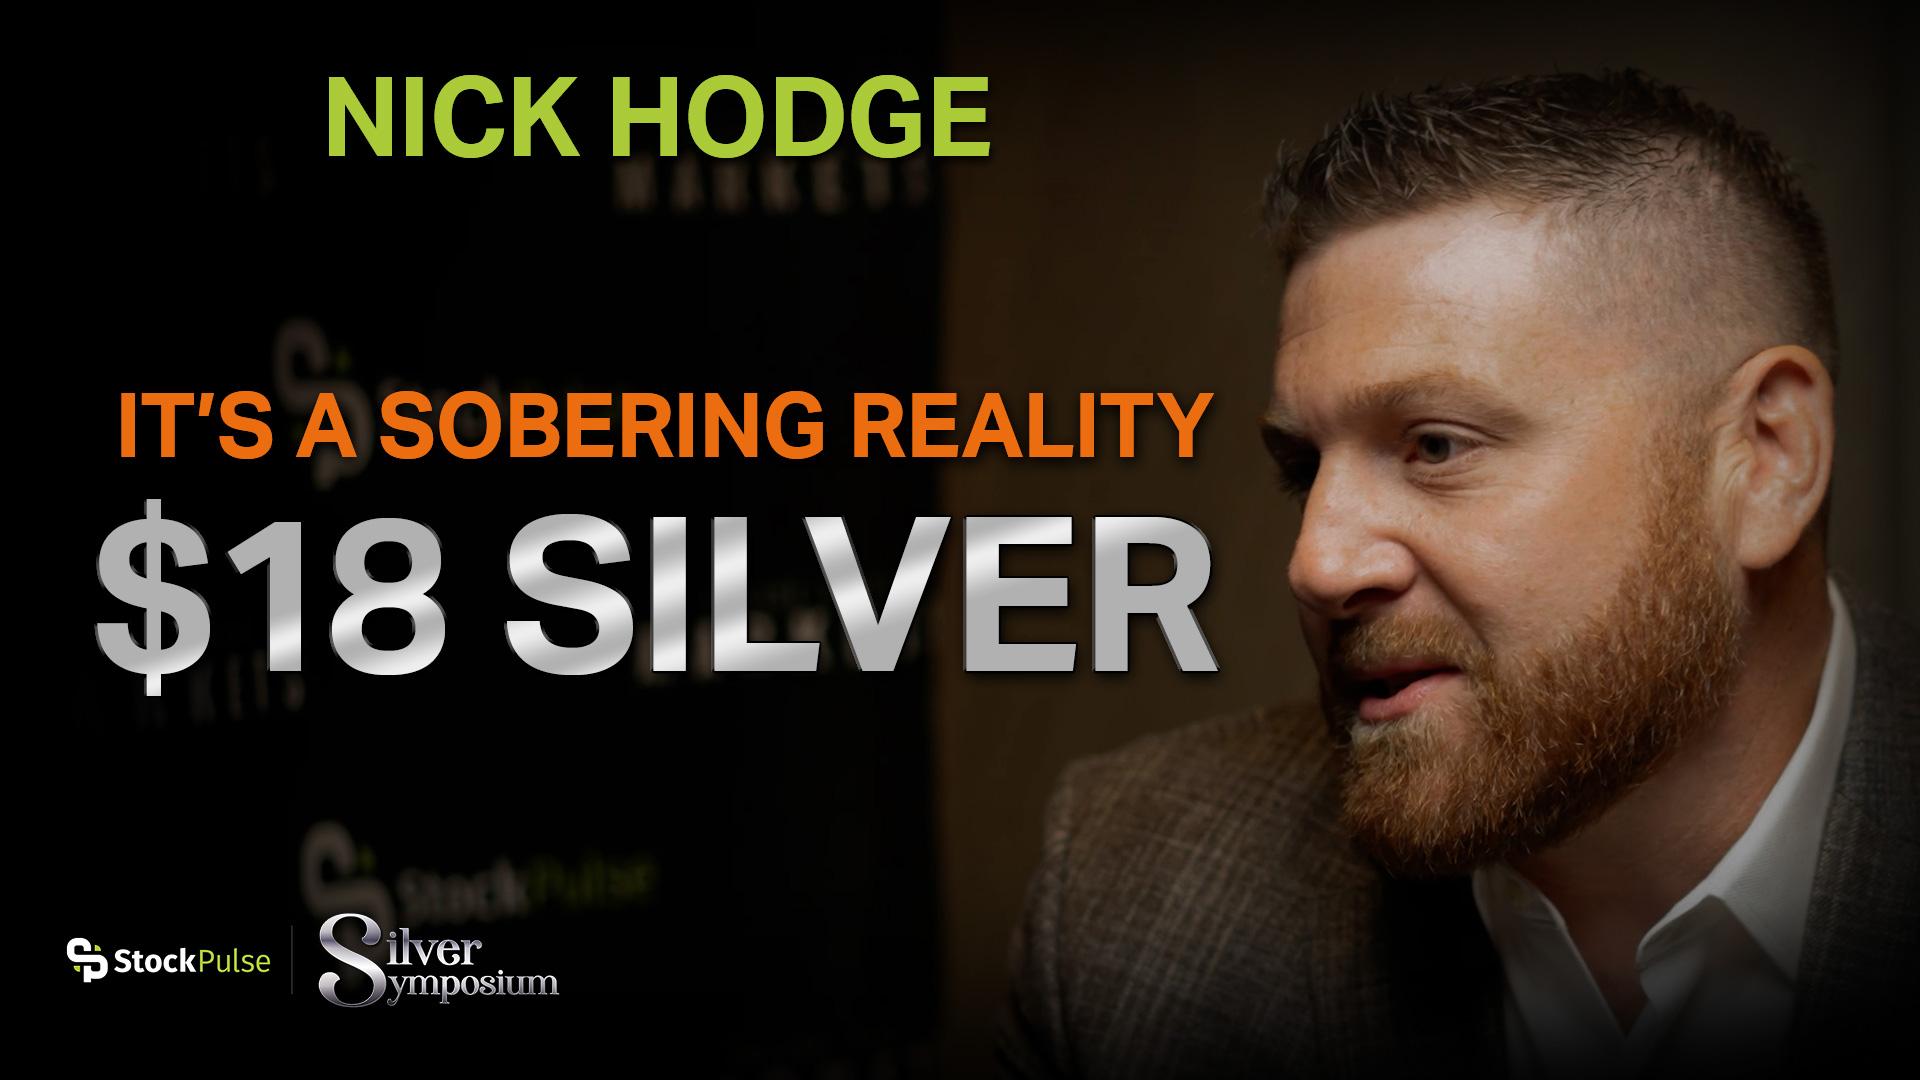 Nick Hodge: It’s a Sobering Reality that Silver is at $18